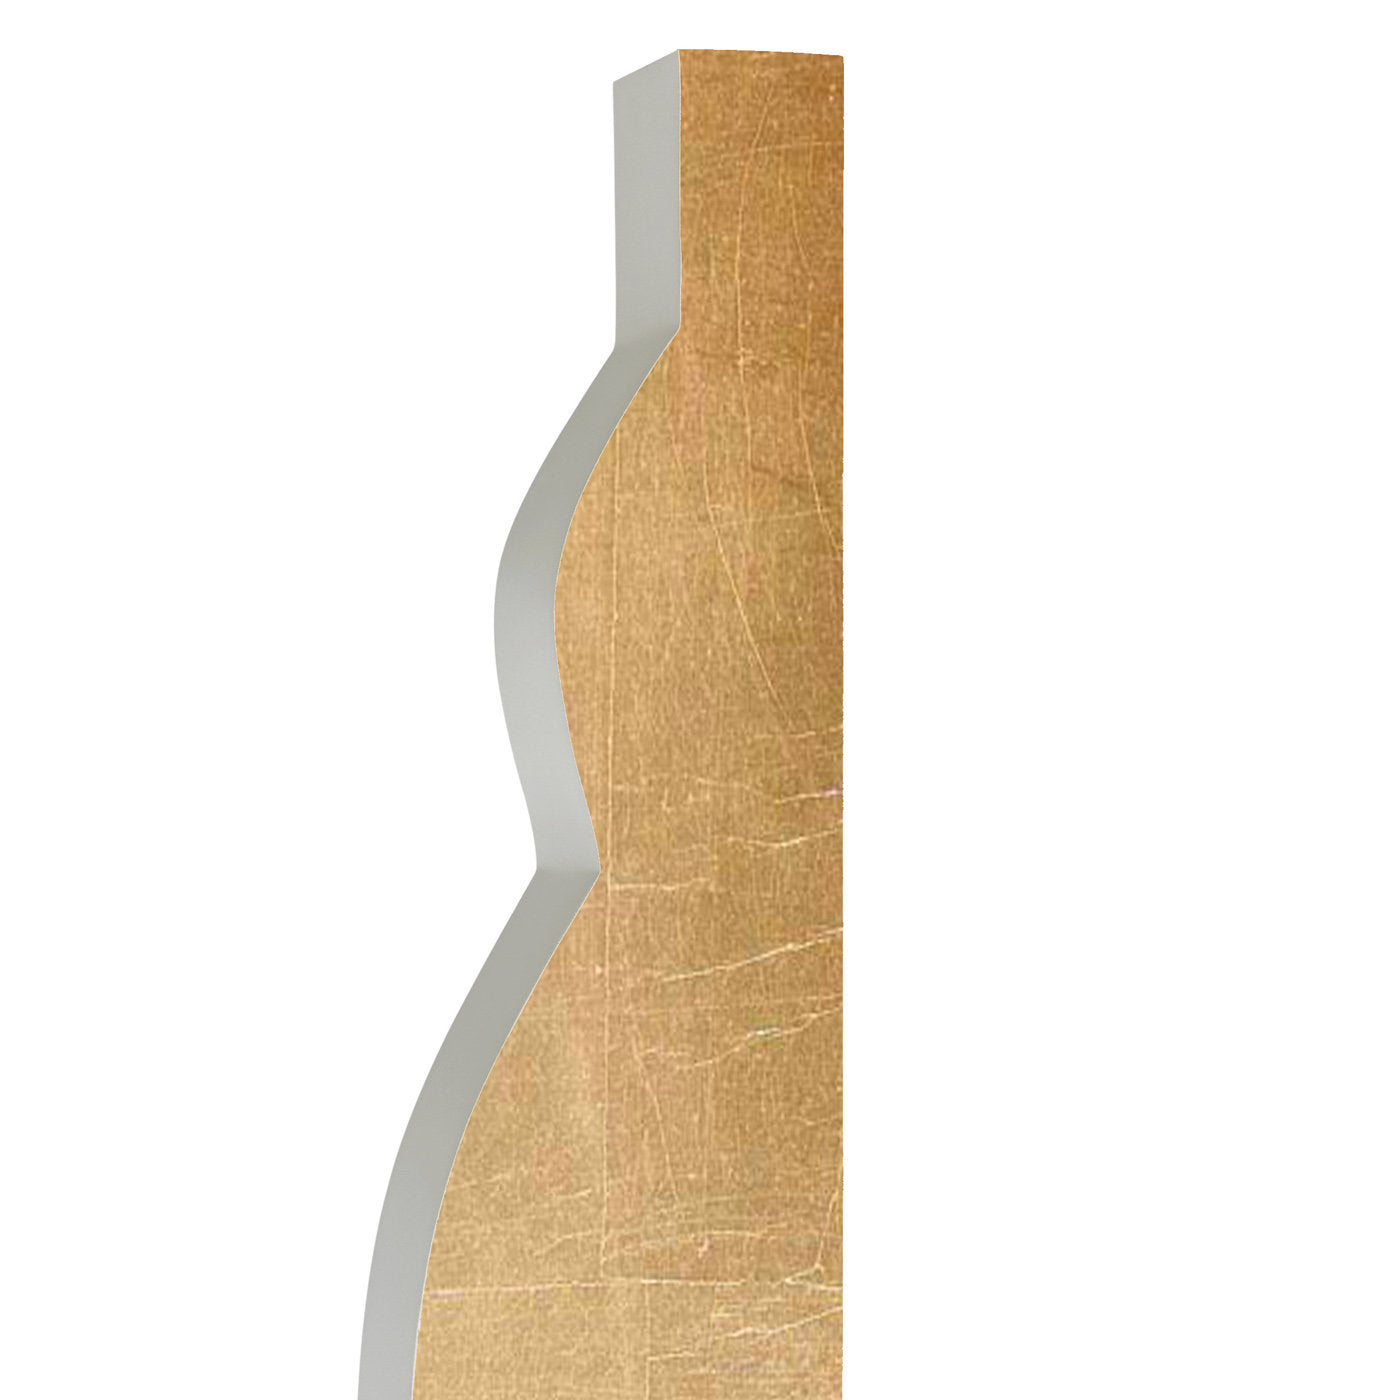 Tall Pacay Vase with Gold Leaf - Alternative view 1